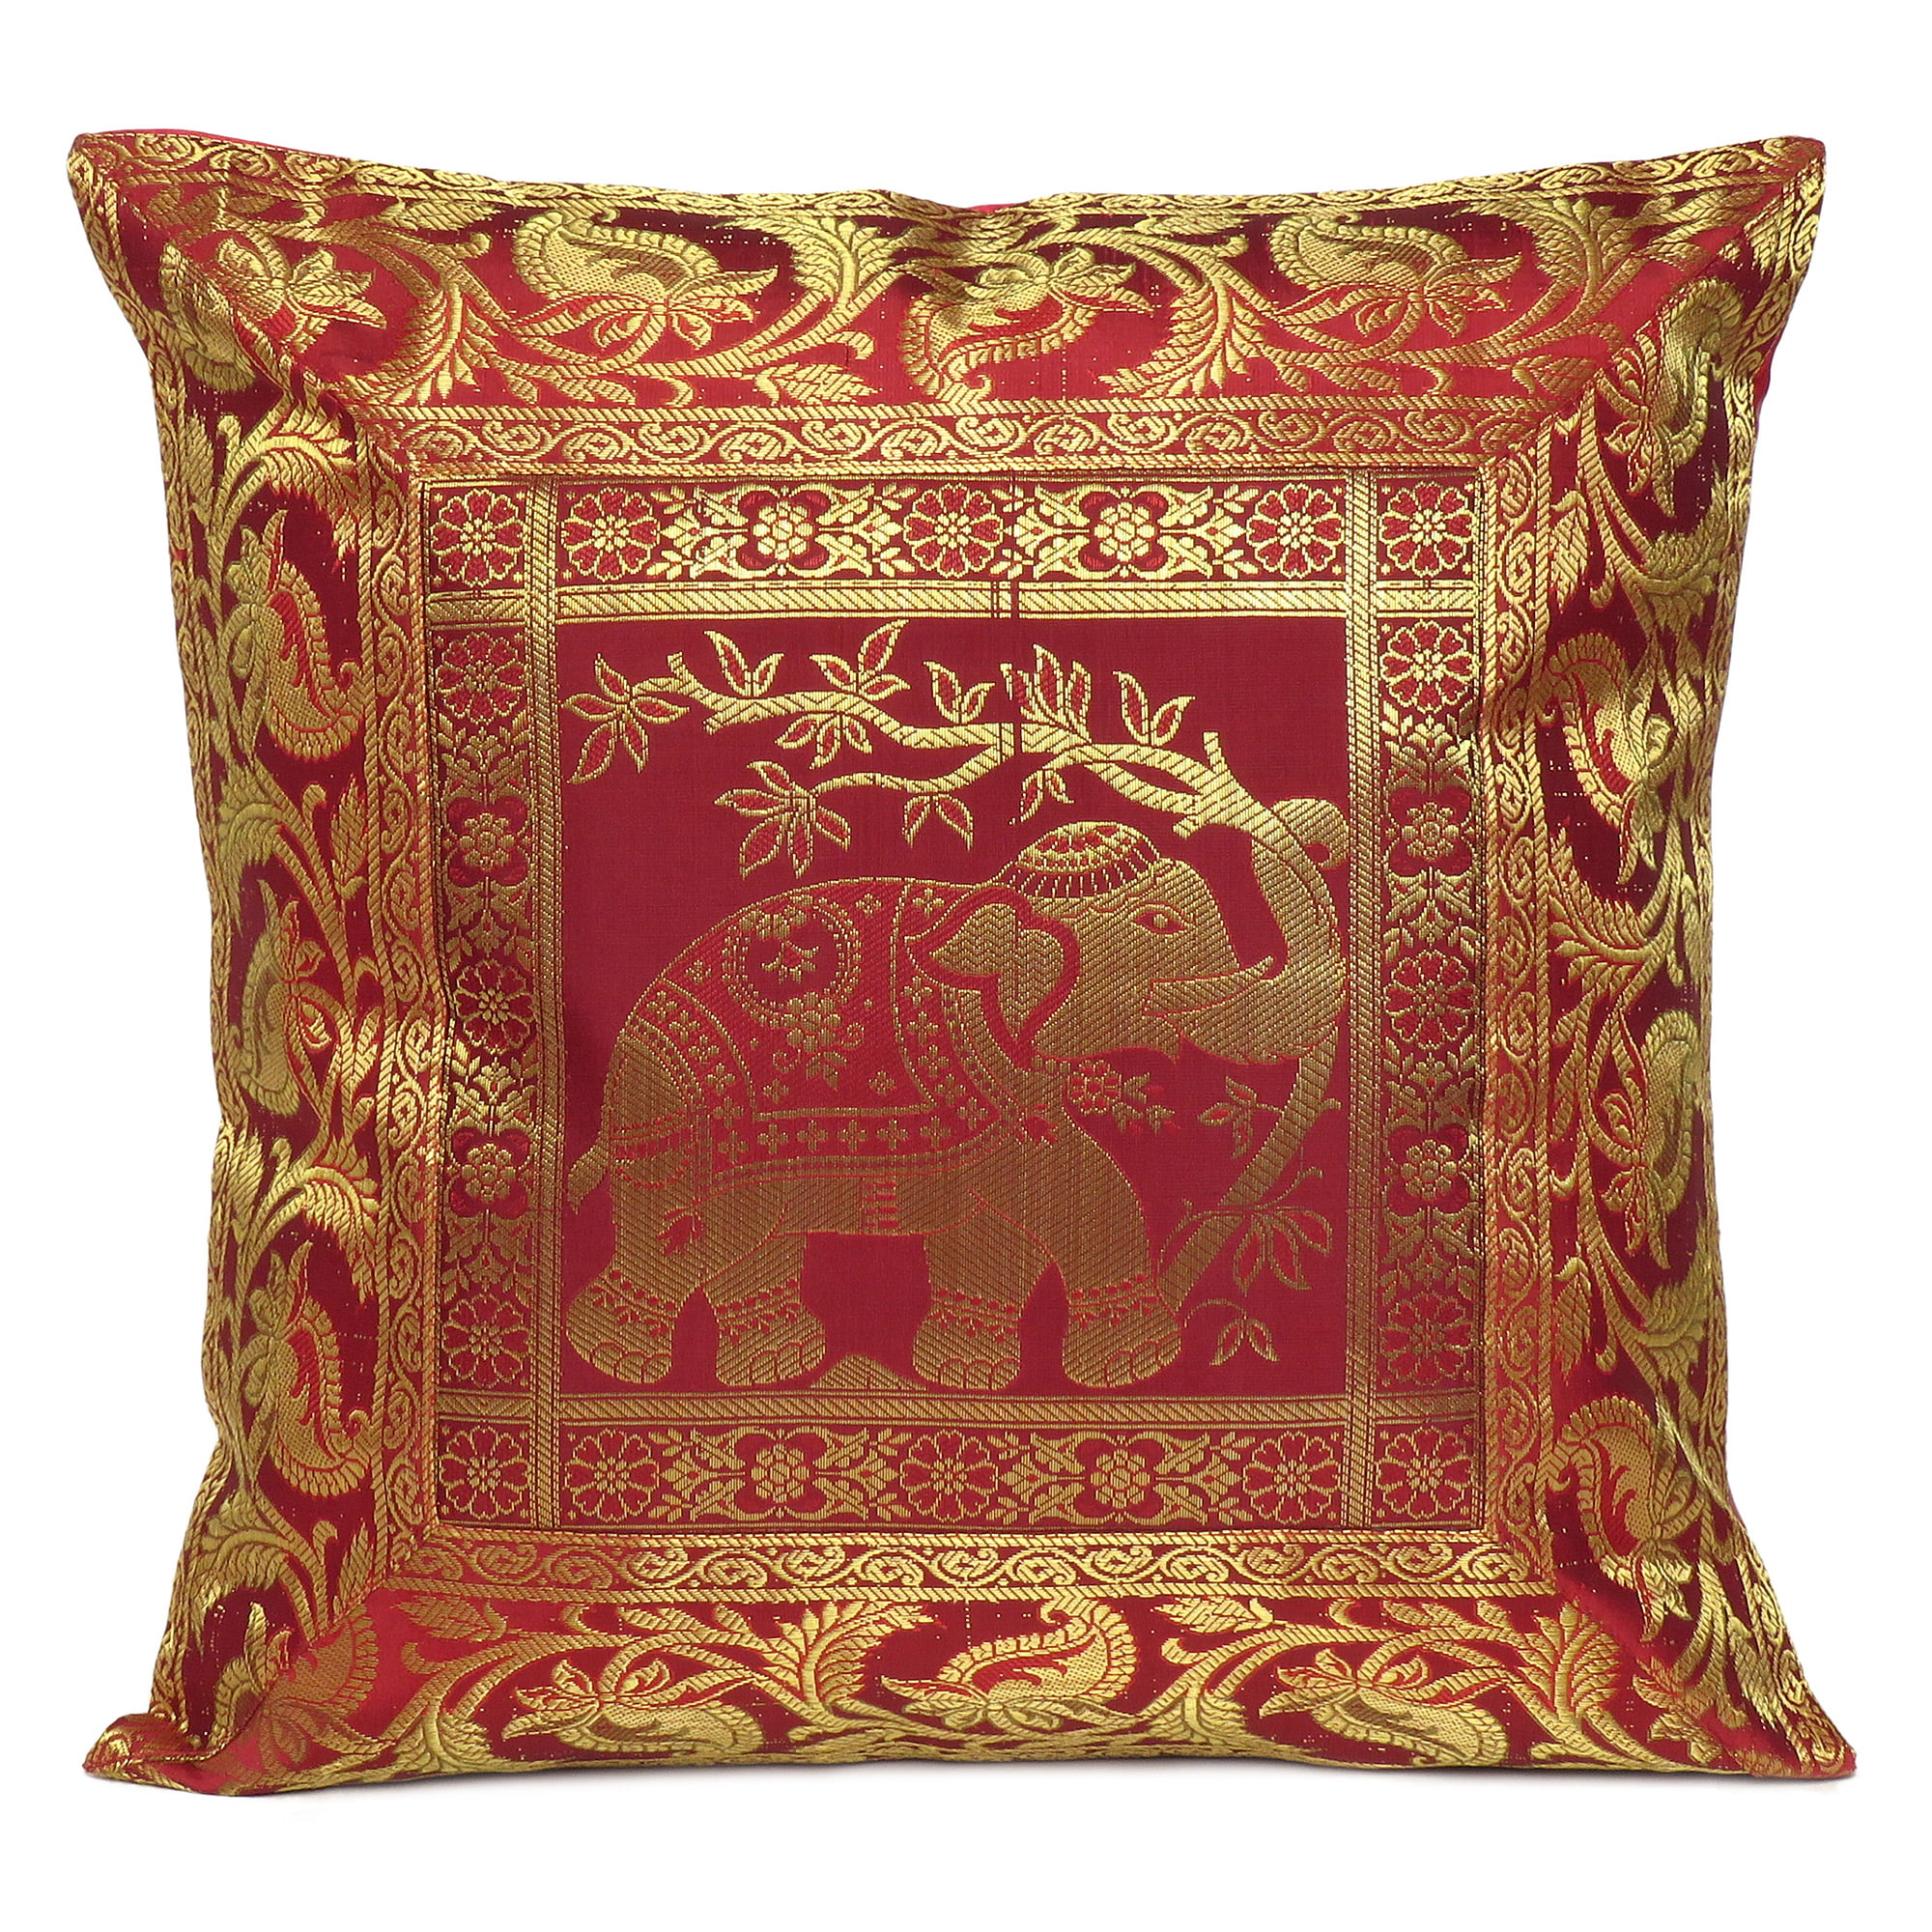 Solid Throw Sofa Pillow Case Art Silk Brocade Bed Cushion Cover for Living Room 